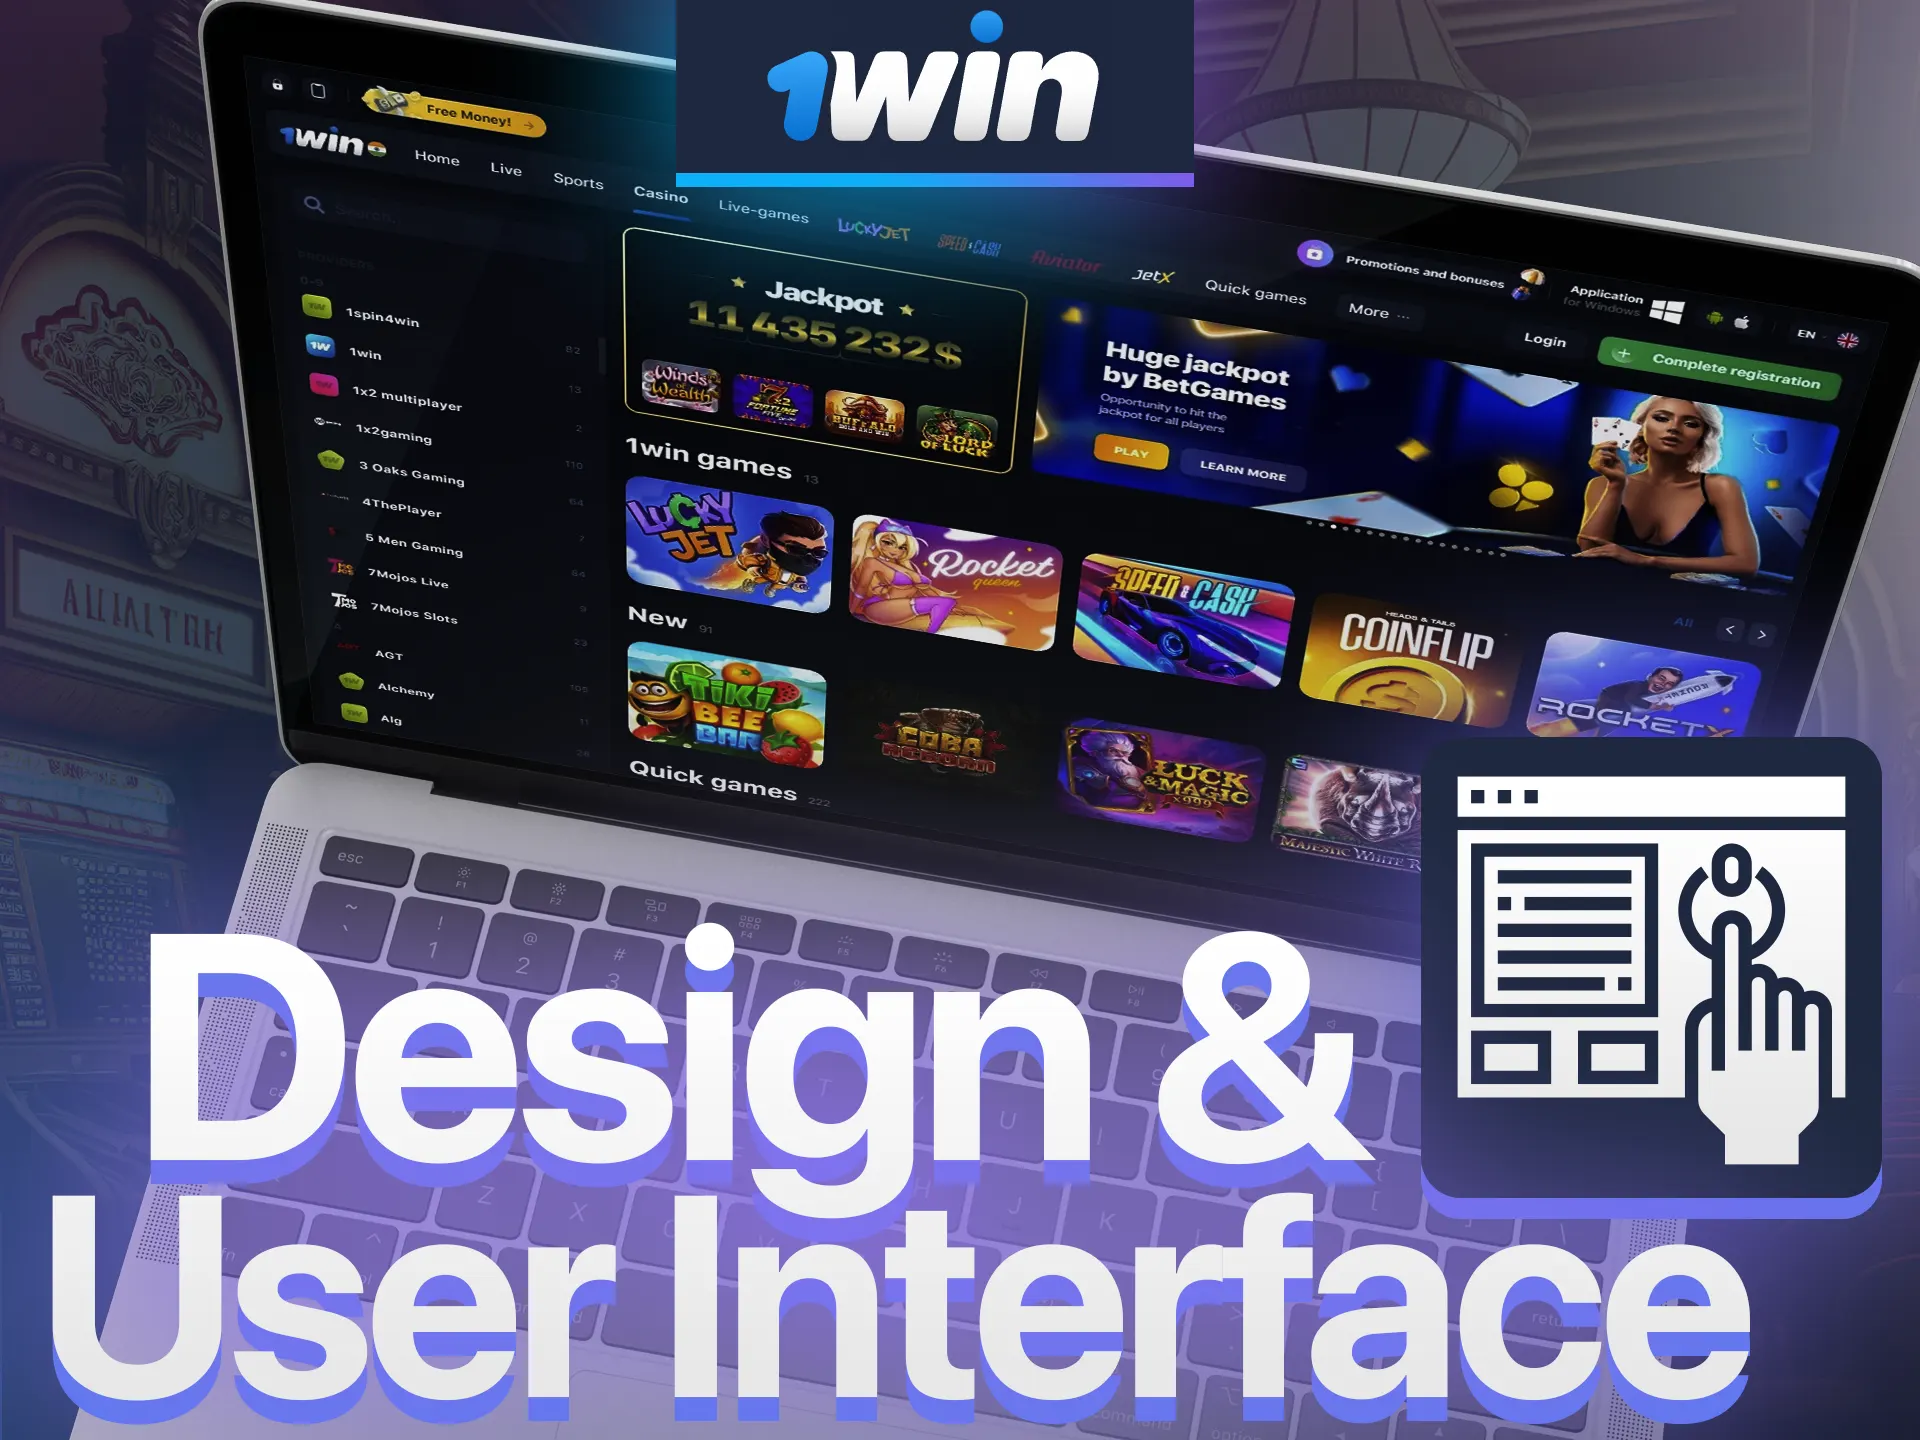 The modern design creates an exciting gaming experience for the 1win user.